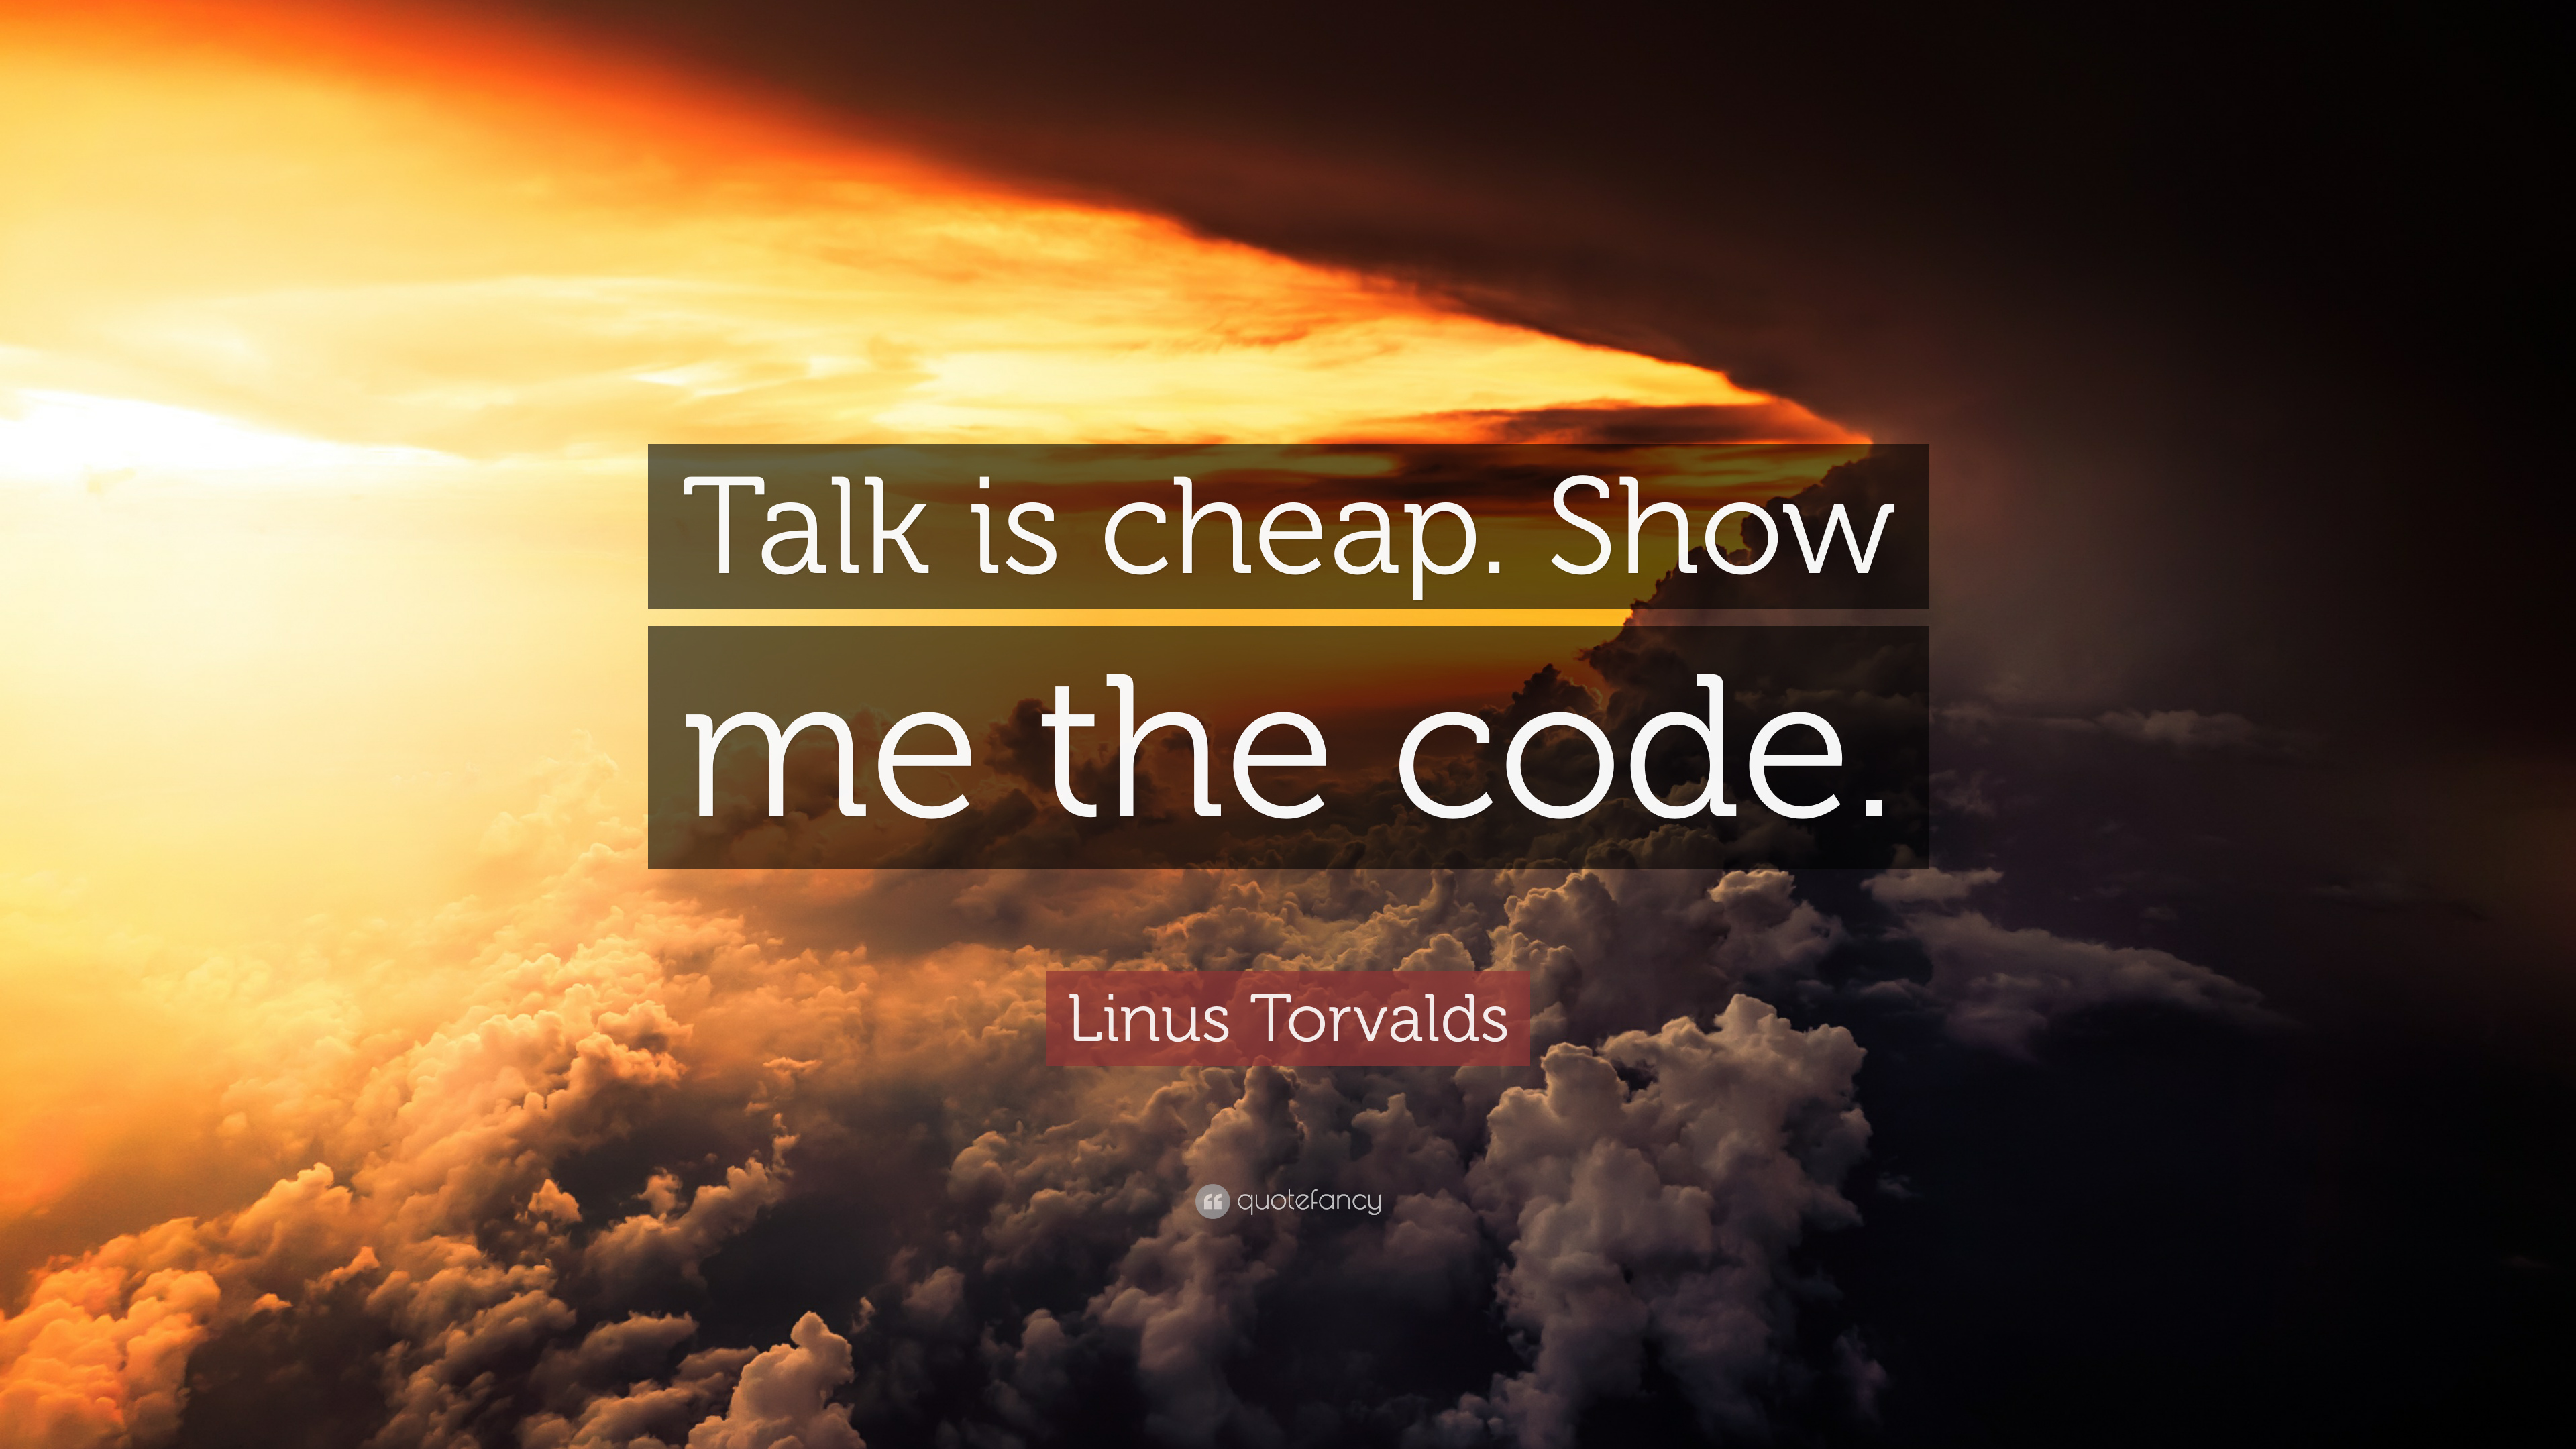 Linus Torvalds Quote: "Talk is cheap. 